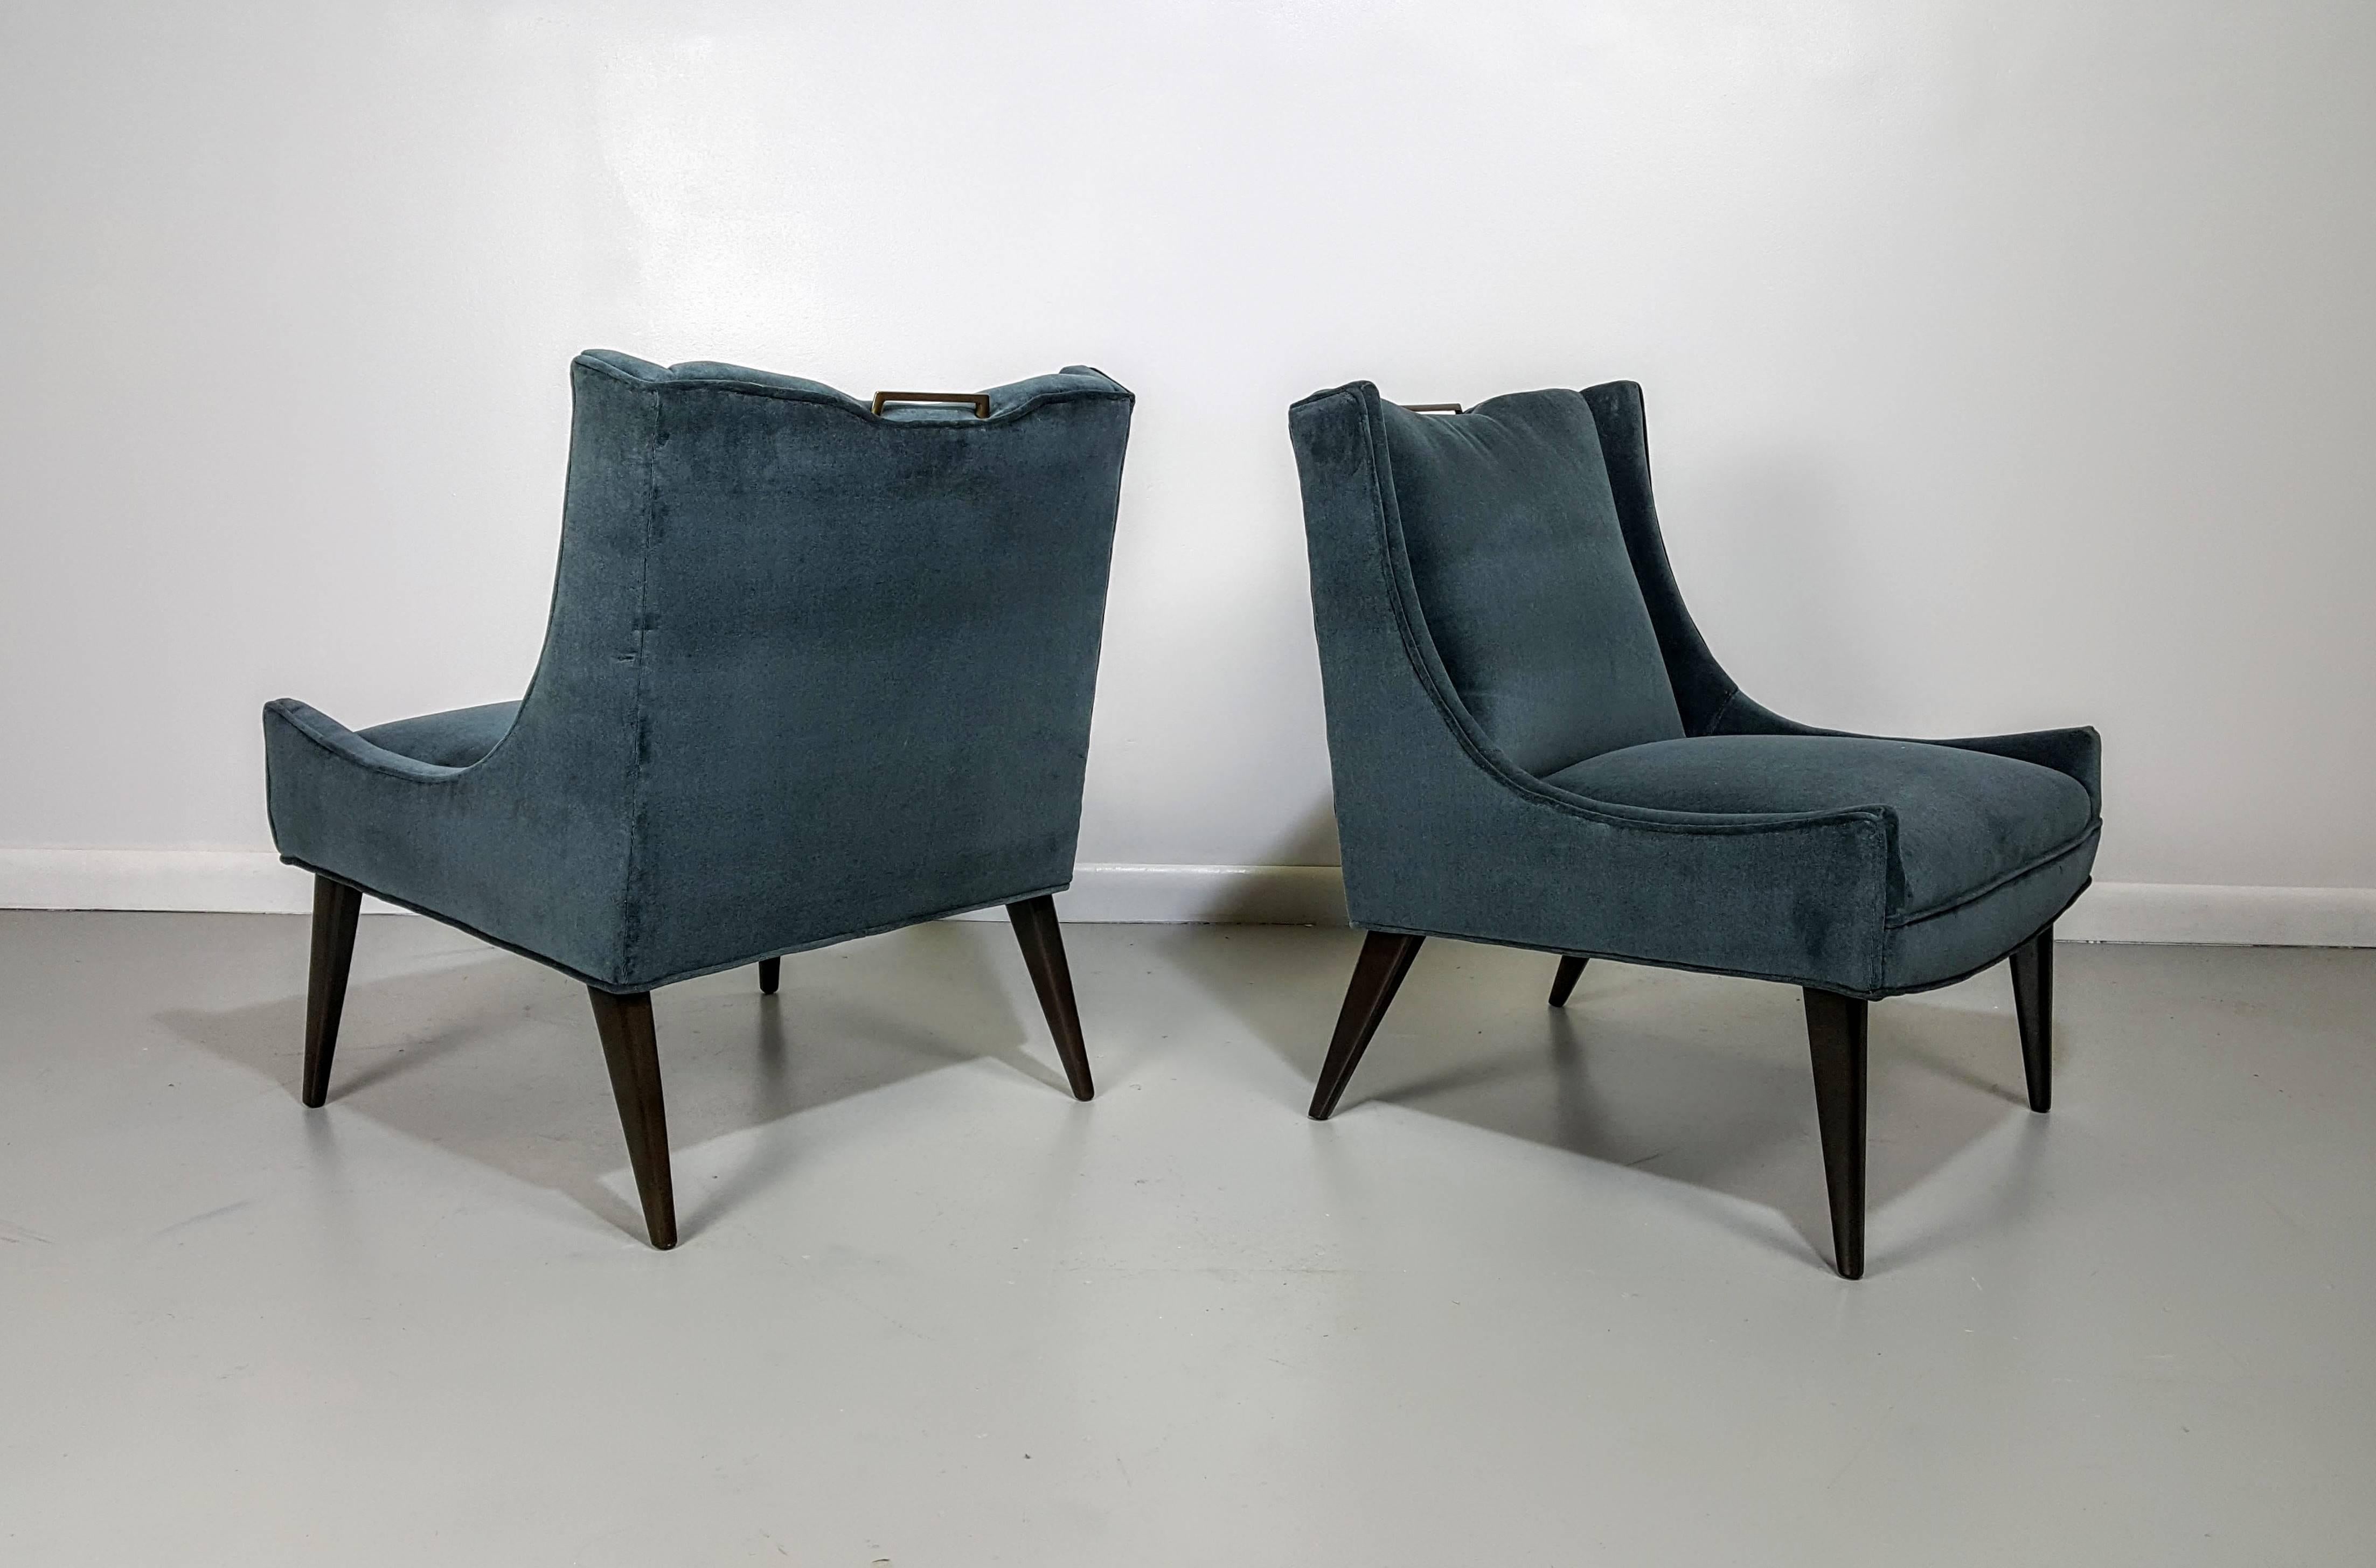 American Pair of Mohair Slipper Chairs in the Manner of Harvey Probber, 1950s